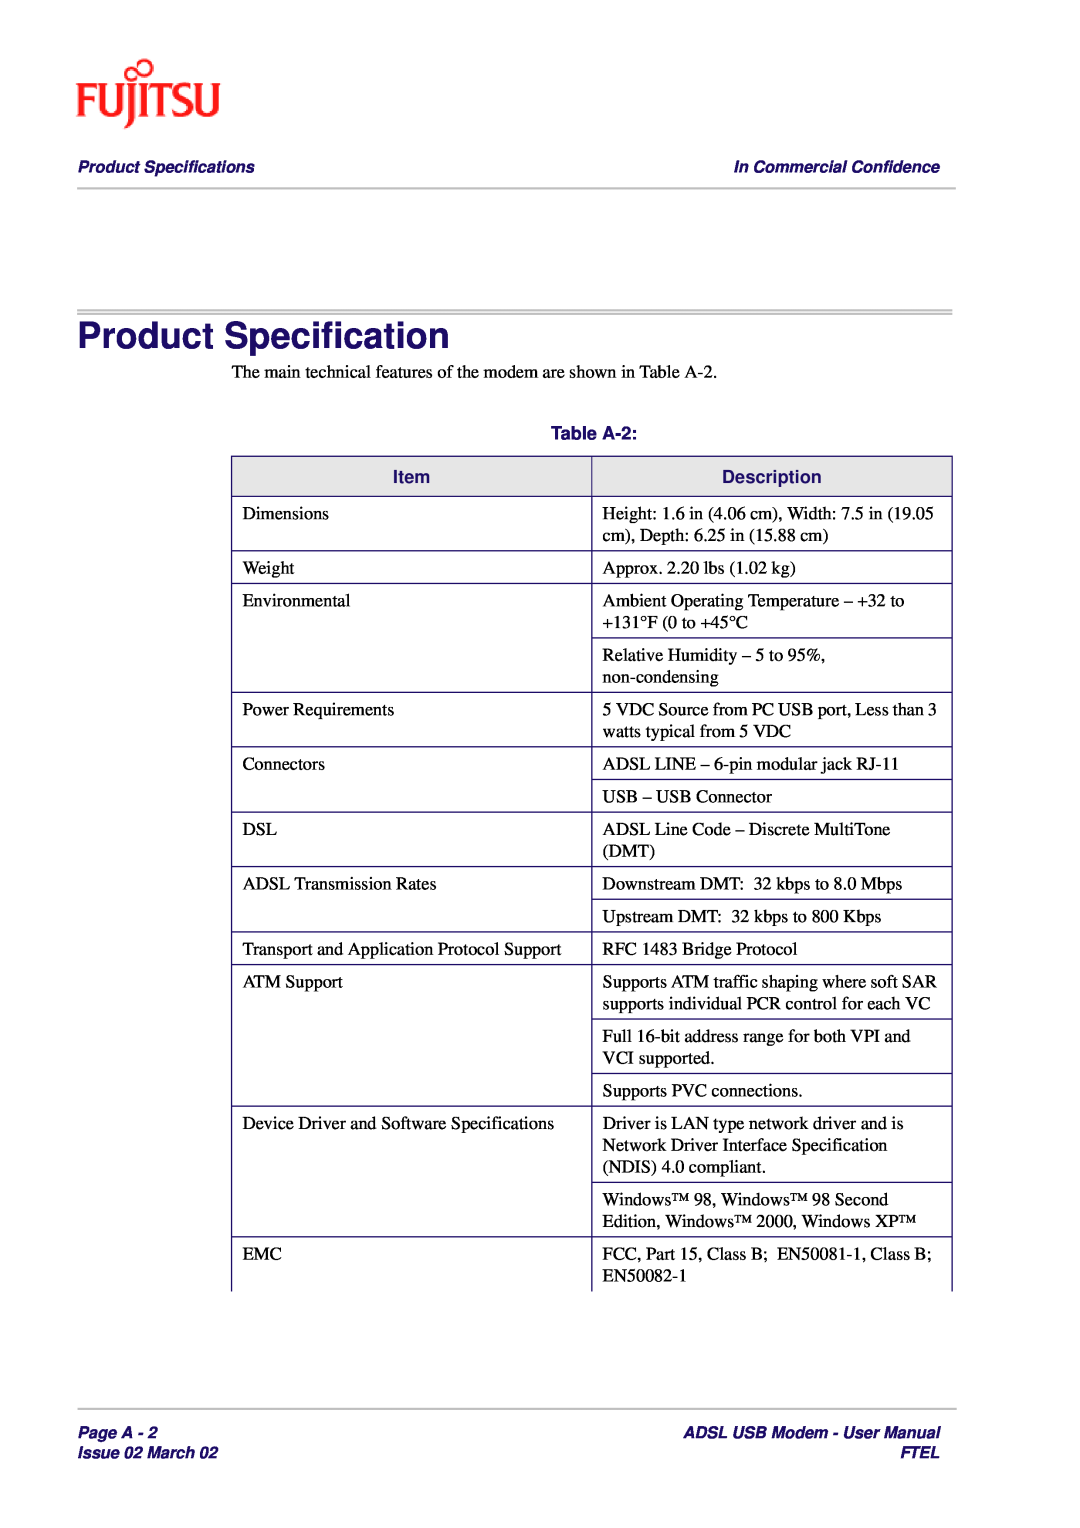 Fujitsu 3XAX-00803AAS user manual Product Specification, Table A-2, Description 